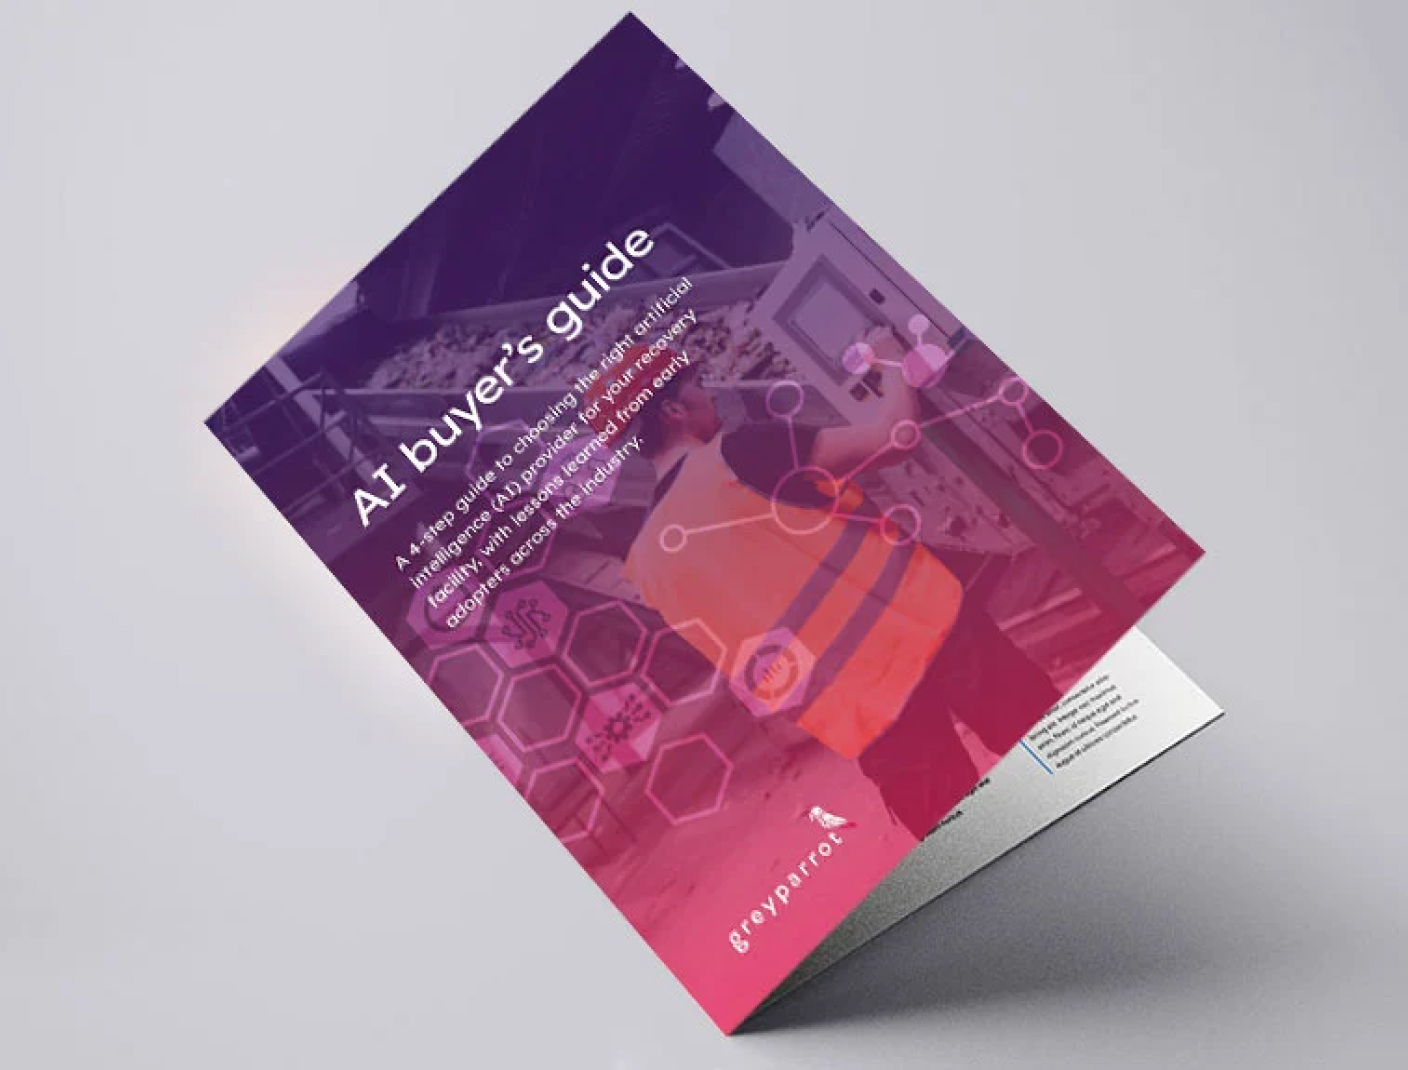 Ebook: The buyer's guide for waste management AI 